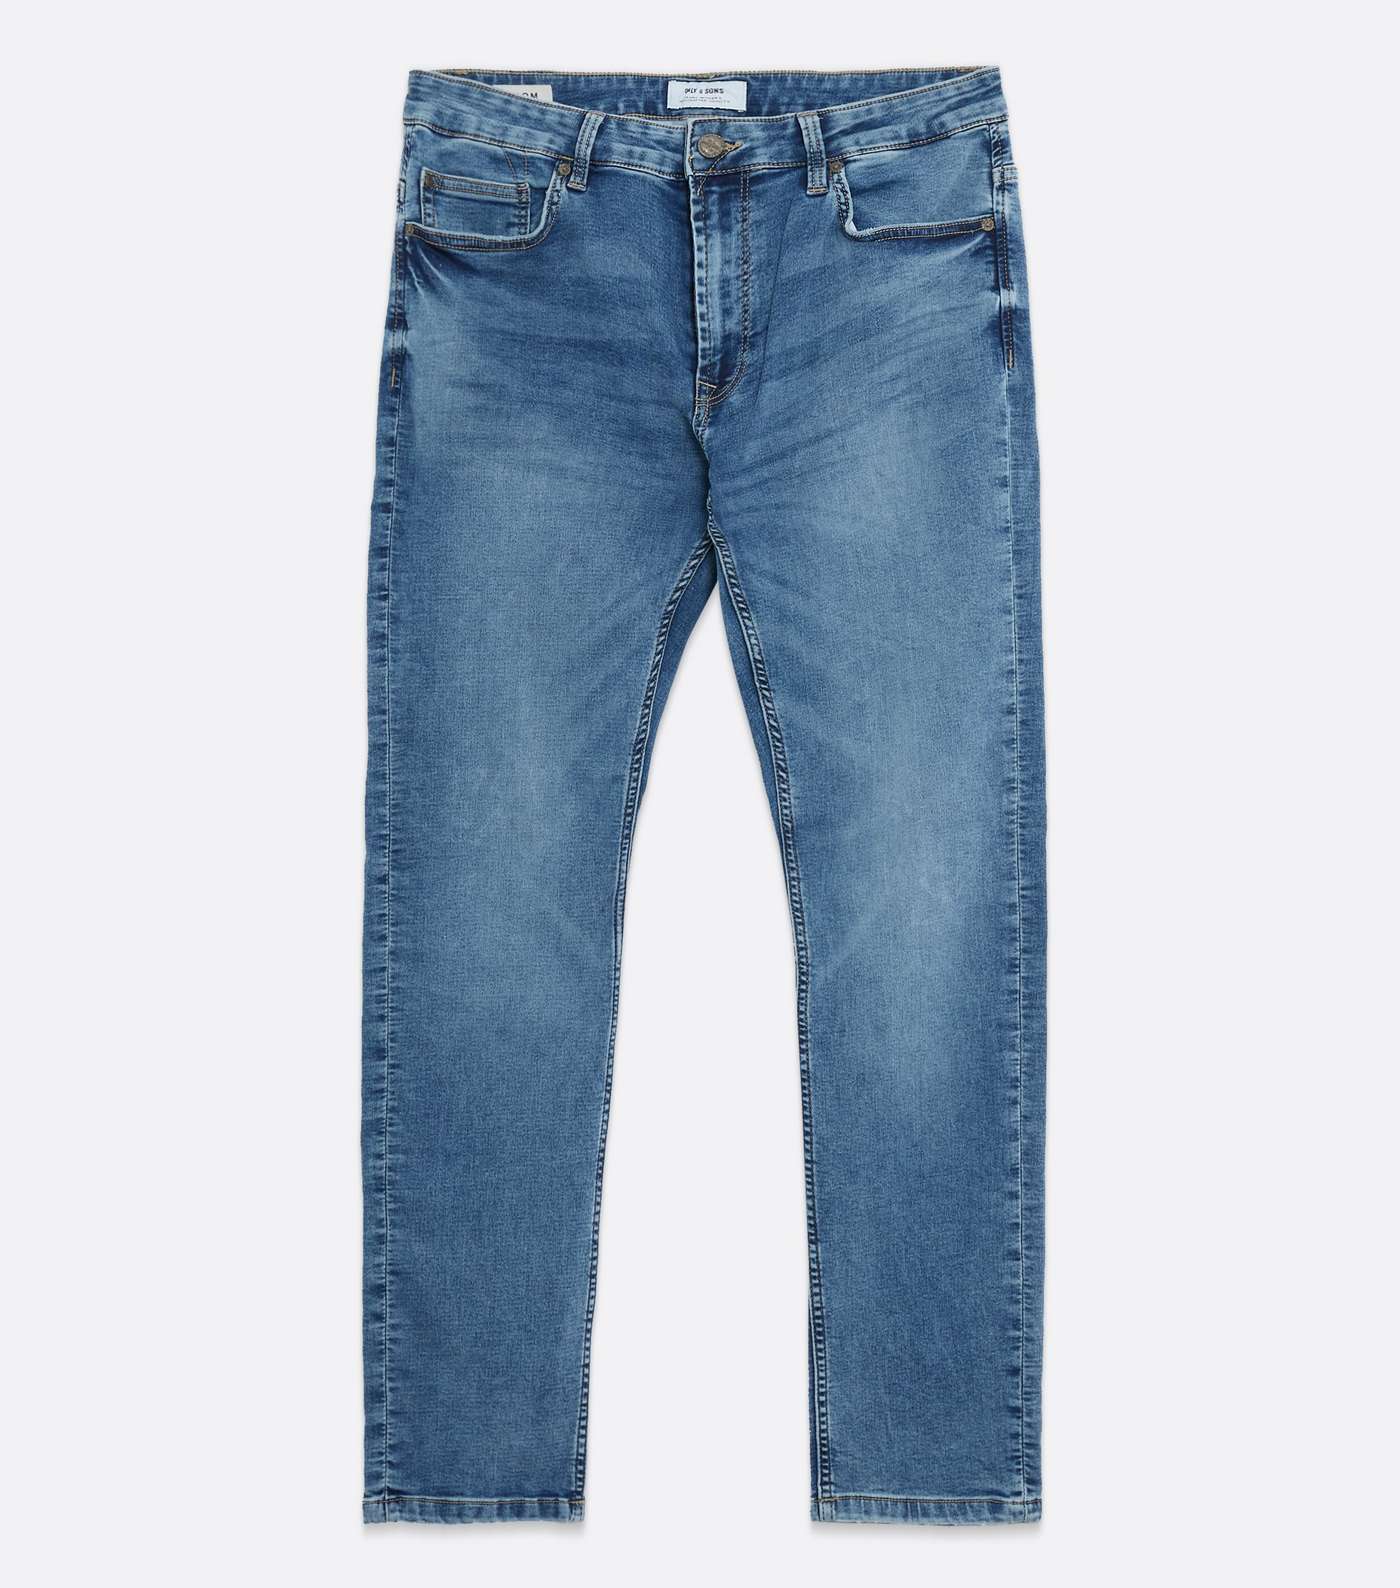 Only & Sons Bright Blue Slim Leg Jeans Image 5